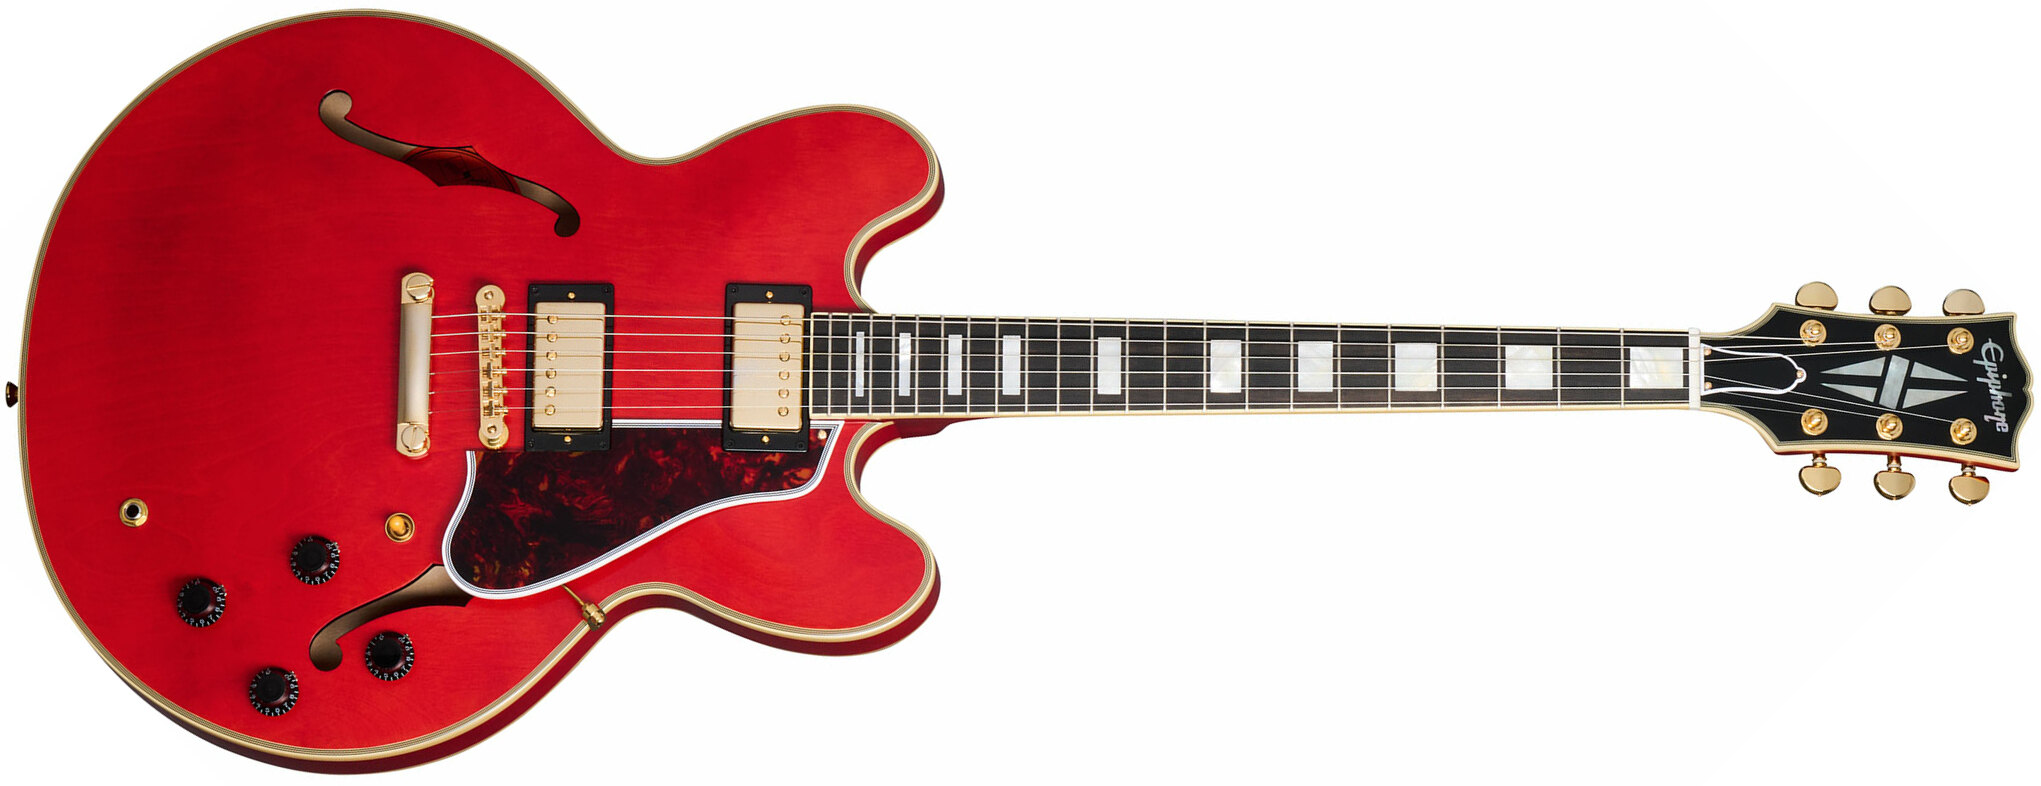 Epiphone Es355 1959 Inspired By 2h Gibson Ht Eb - Vos Cherry Red - Guitare Électrique 1/2 Caisse - Main picture